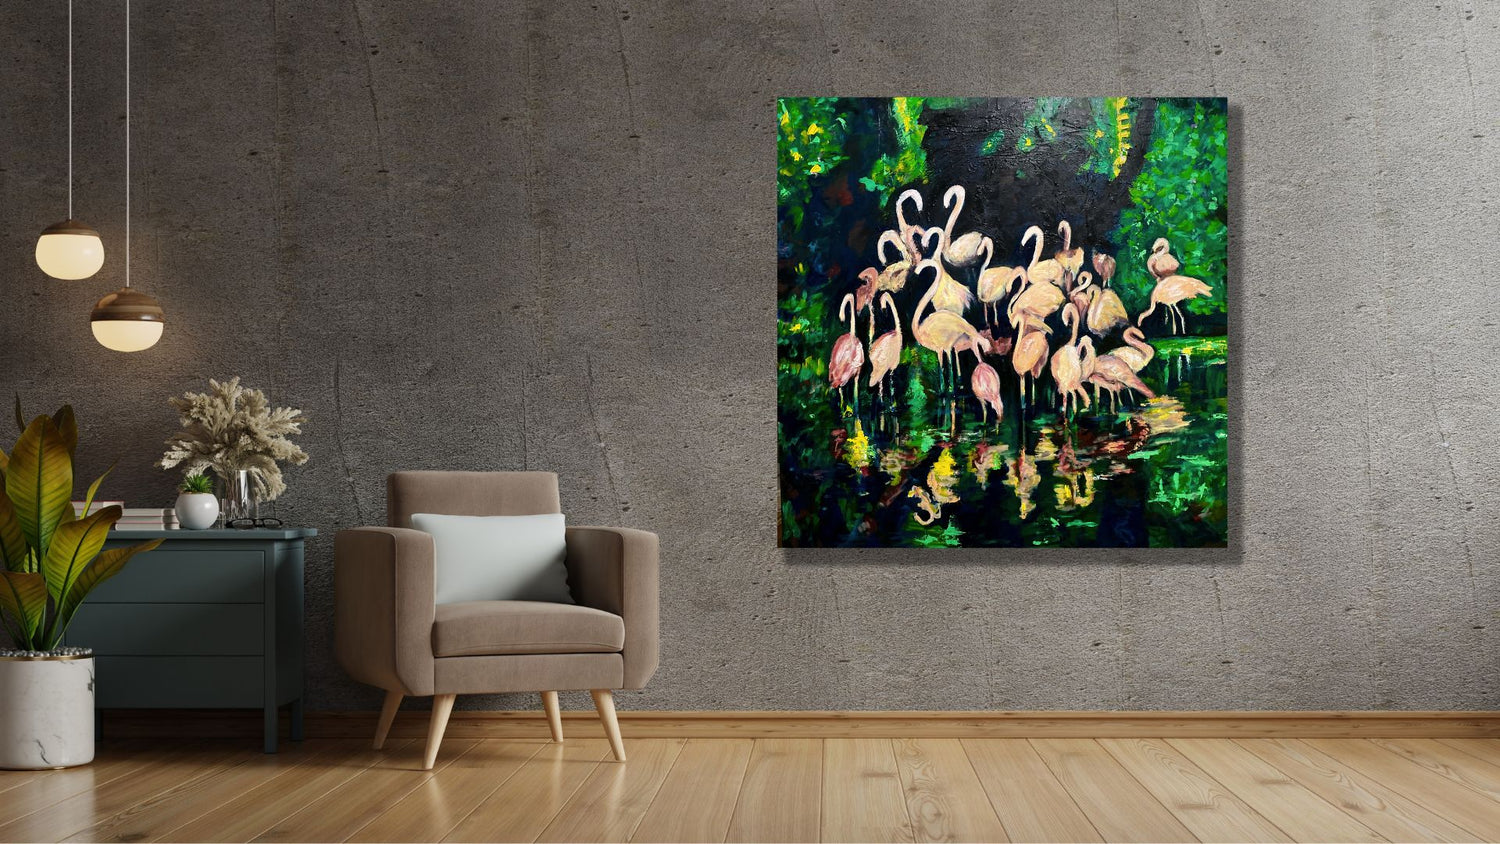 Night of the Flamingos Acrylic painting 36 x 36 by noelia montaner 